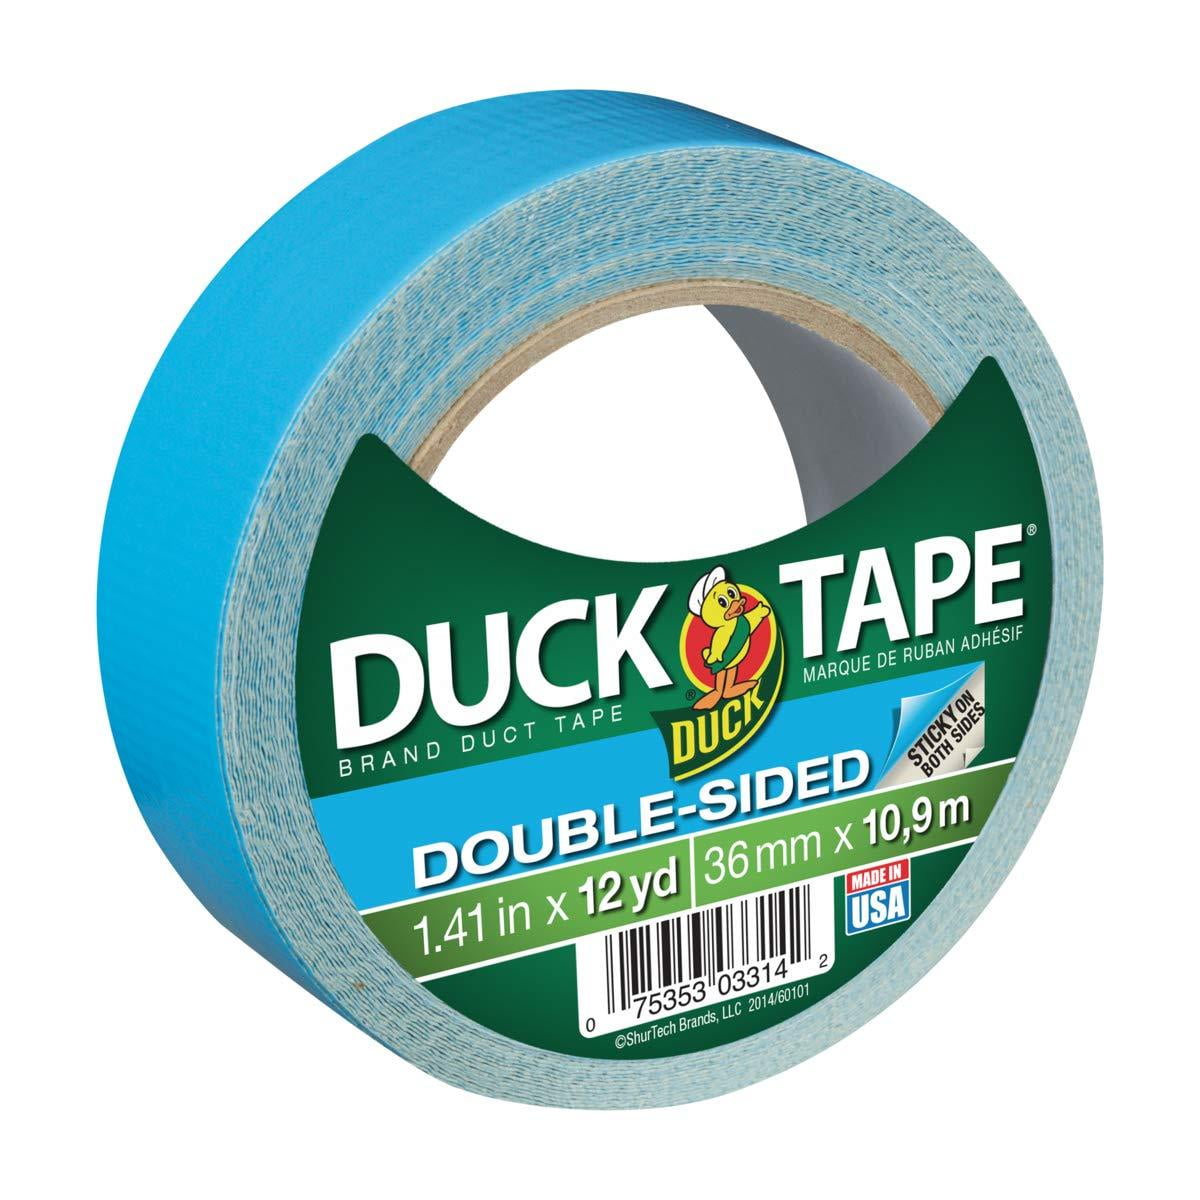 Duck Brand 240200 Double Sided Duct Tape 14 Inch By 12 Yards Single